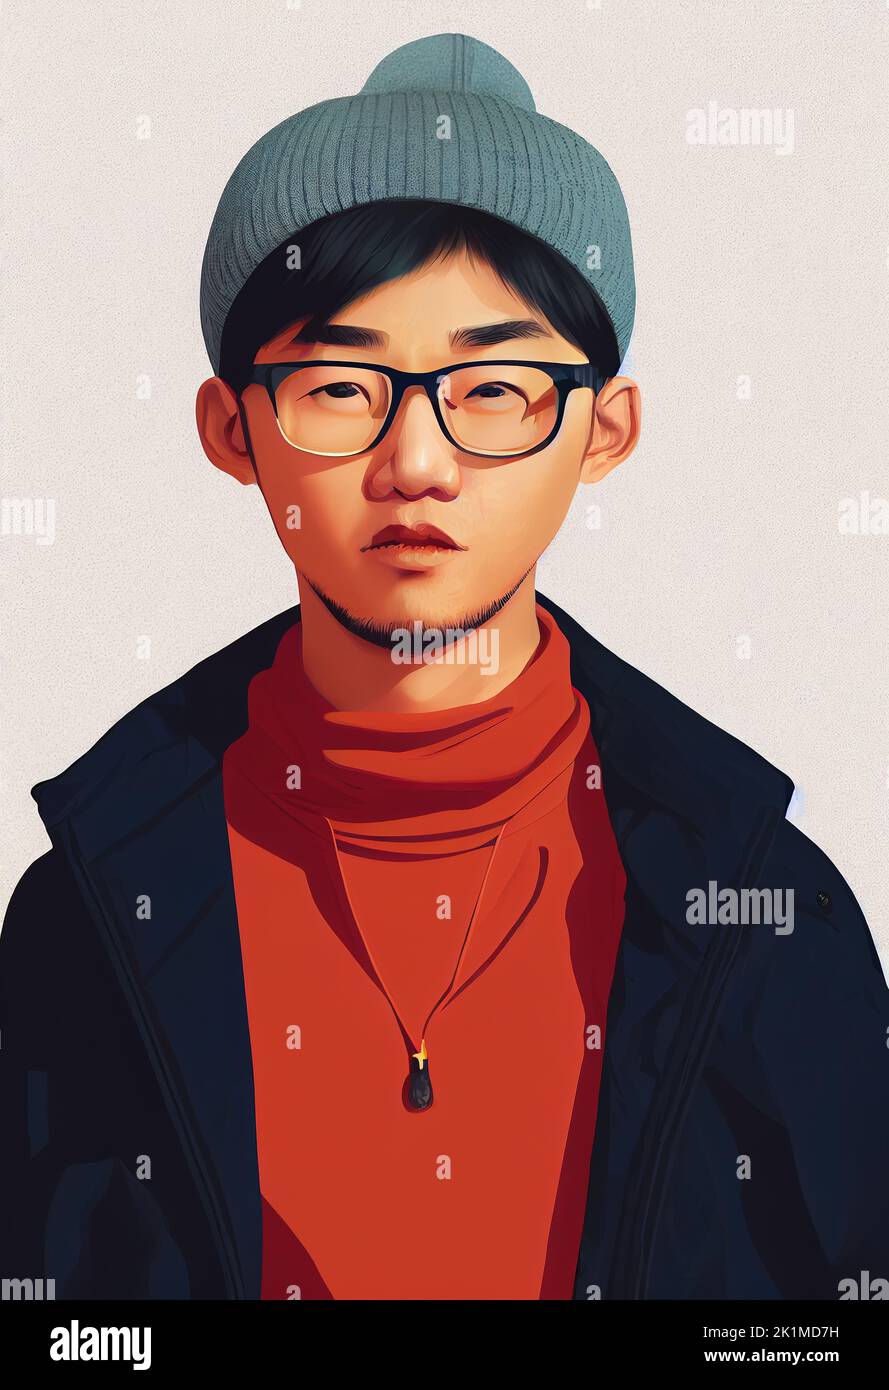 A digital portrait of a young Asian man with glasses. Stock Photo